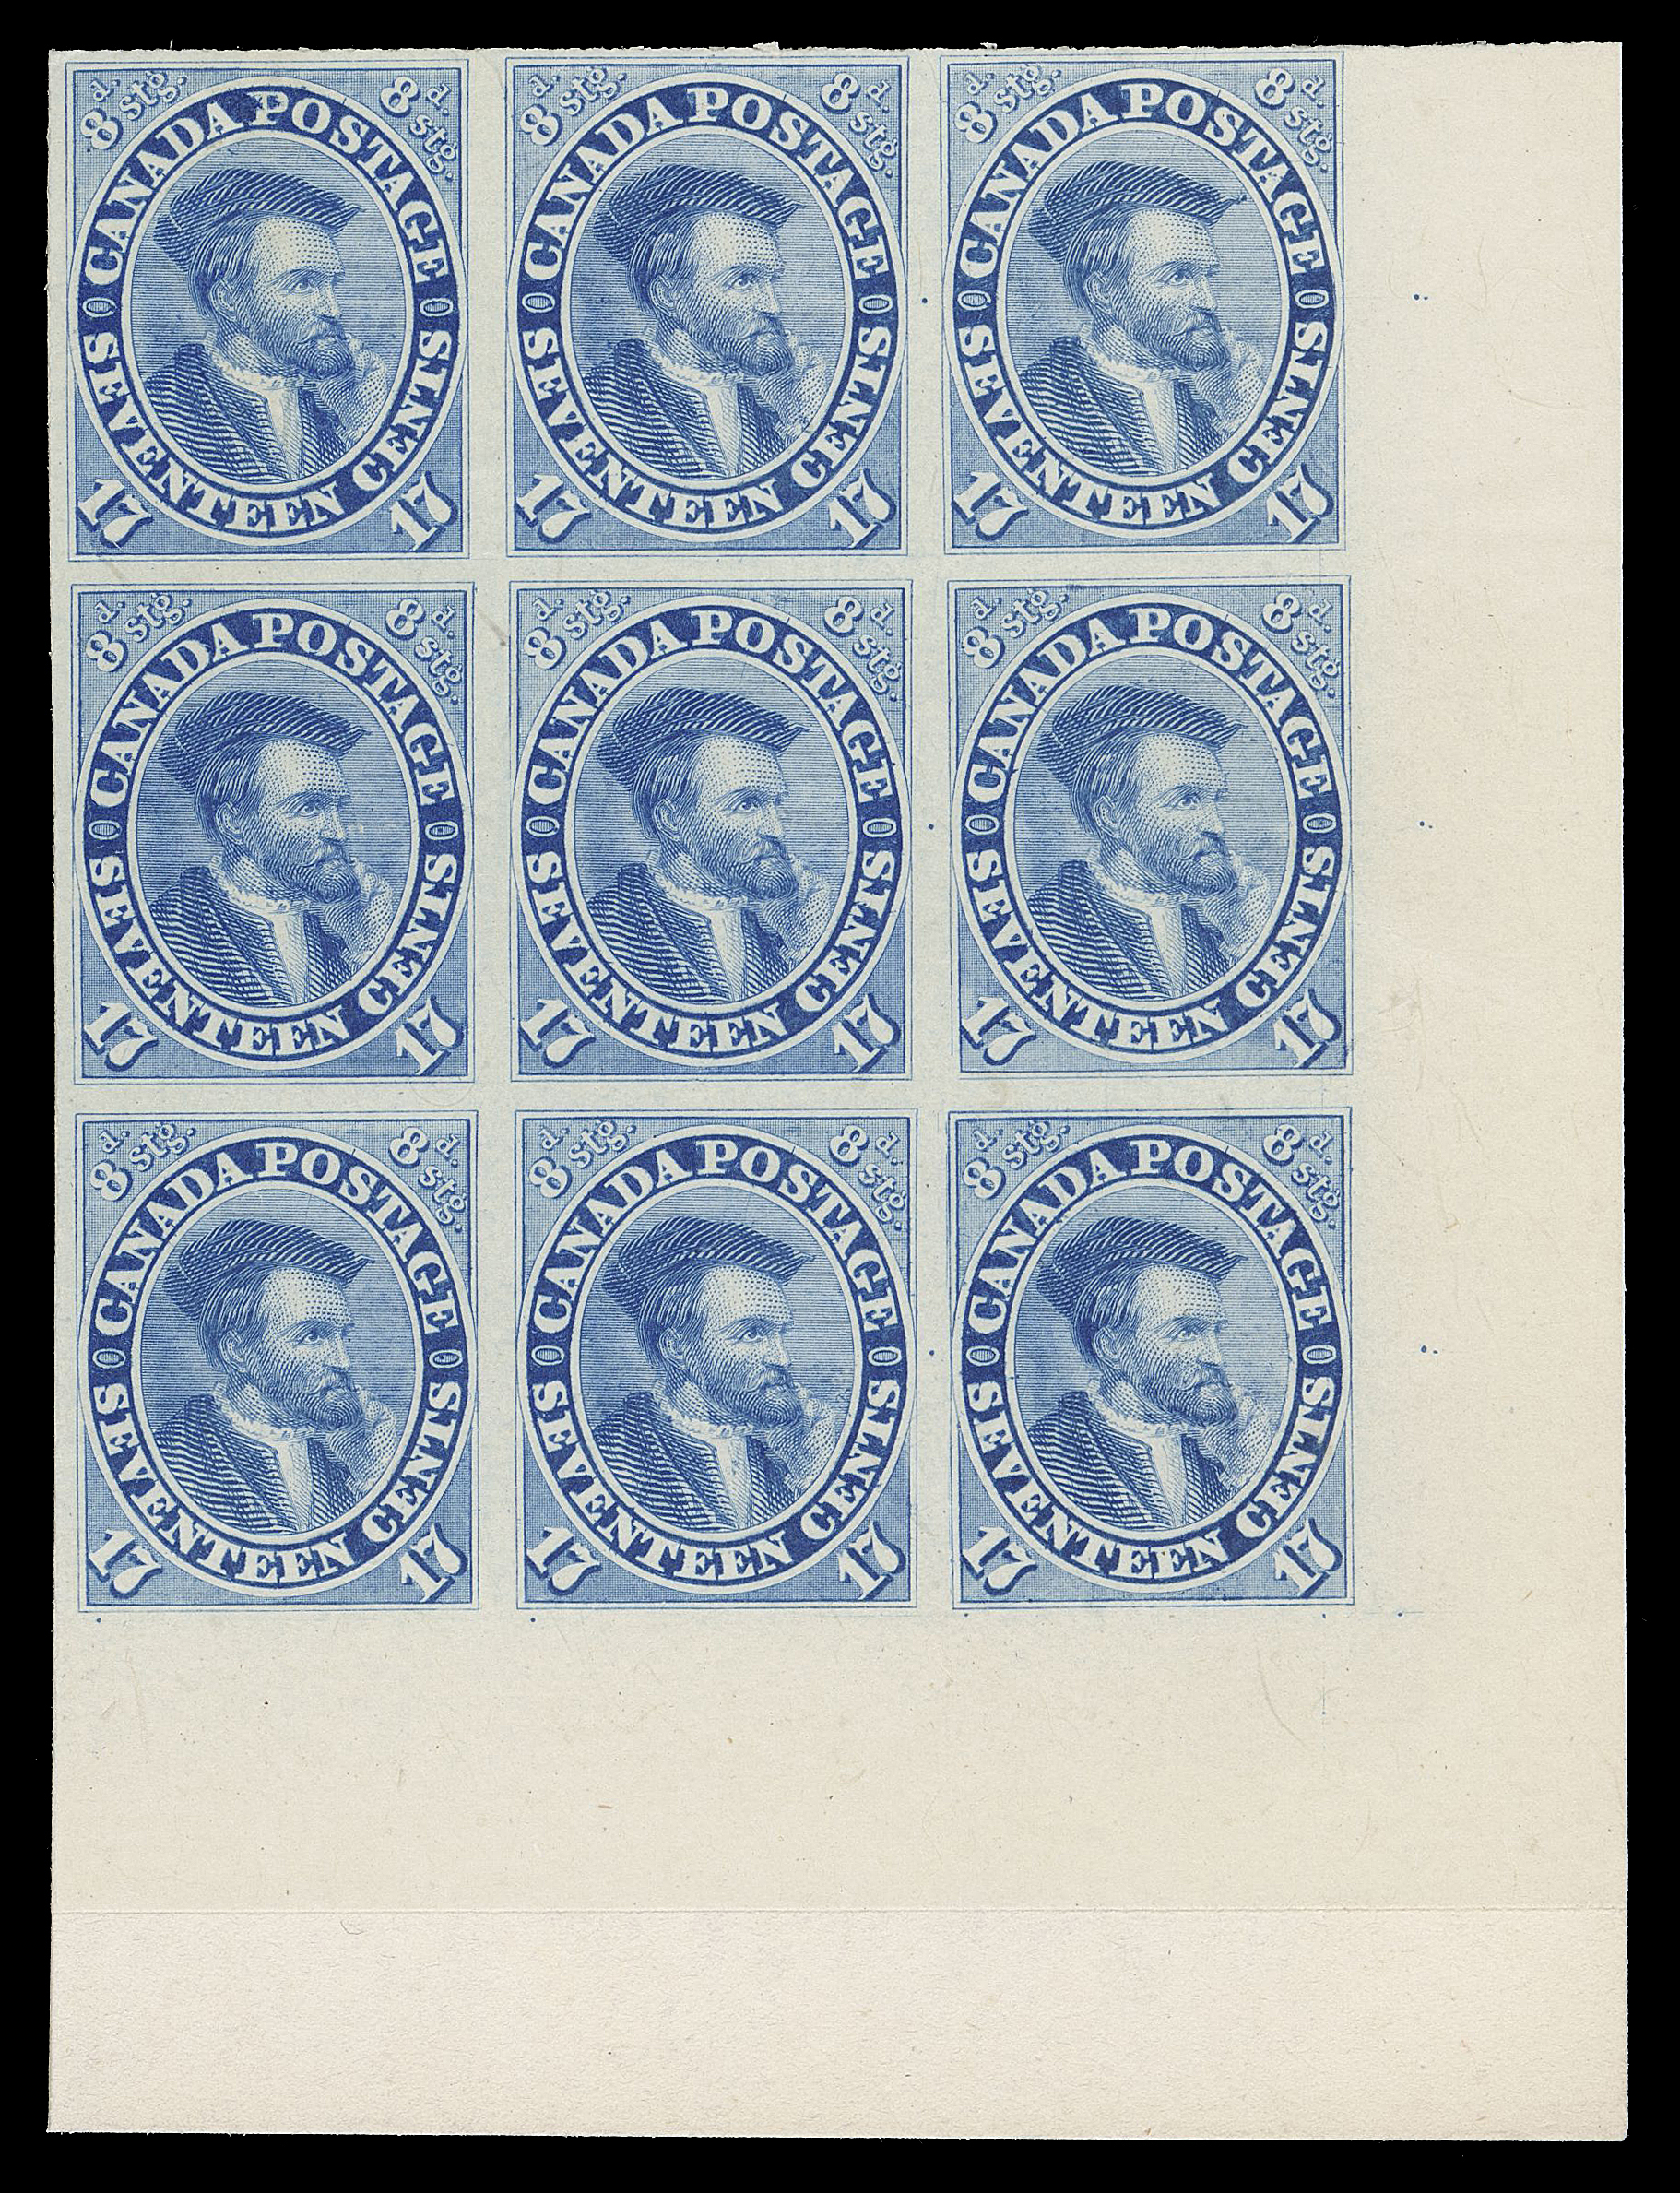 TEN PENCE AND SEVENTEEN CENTS  19TC + variety,A choice, fresh trial colour corner margin plate proof block of nine (Positions 78-80 / 98-100) in the distinctive pale blue shade on card mounted india paper, showing the Major Re-entry (Position 100) plate variety with characteristic doubling of left vertical frameline, in oval next to "AGE" and "ENTS" of "POSTAGE" and "CENTS" respectively, etc. A desirable block showing the major plate variety, VF (Unitrade cat. as normal proofs)

Provenance: The "Lindemann" Collection (private treaty, circa. 1997)

Another known Re-entry can be seen at Position 80 (upper right proof).